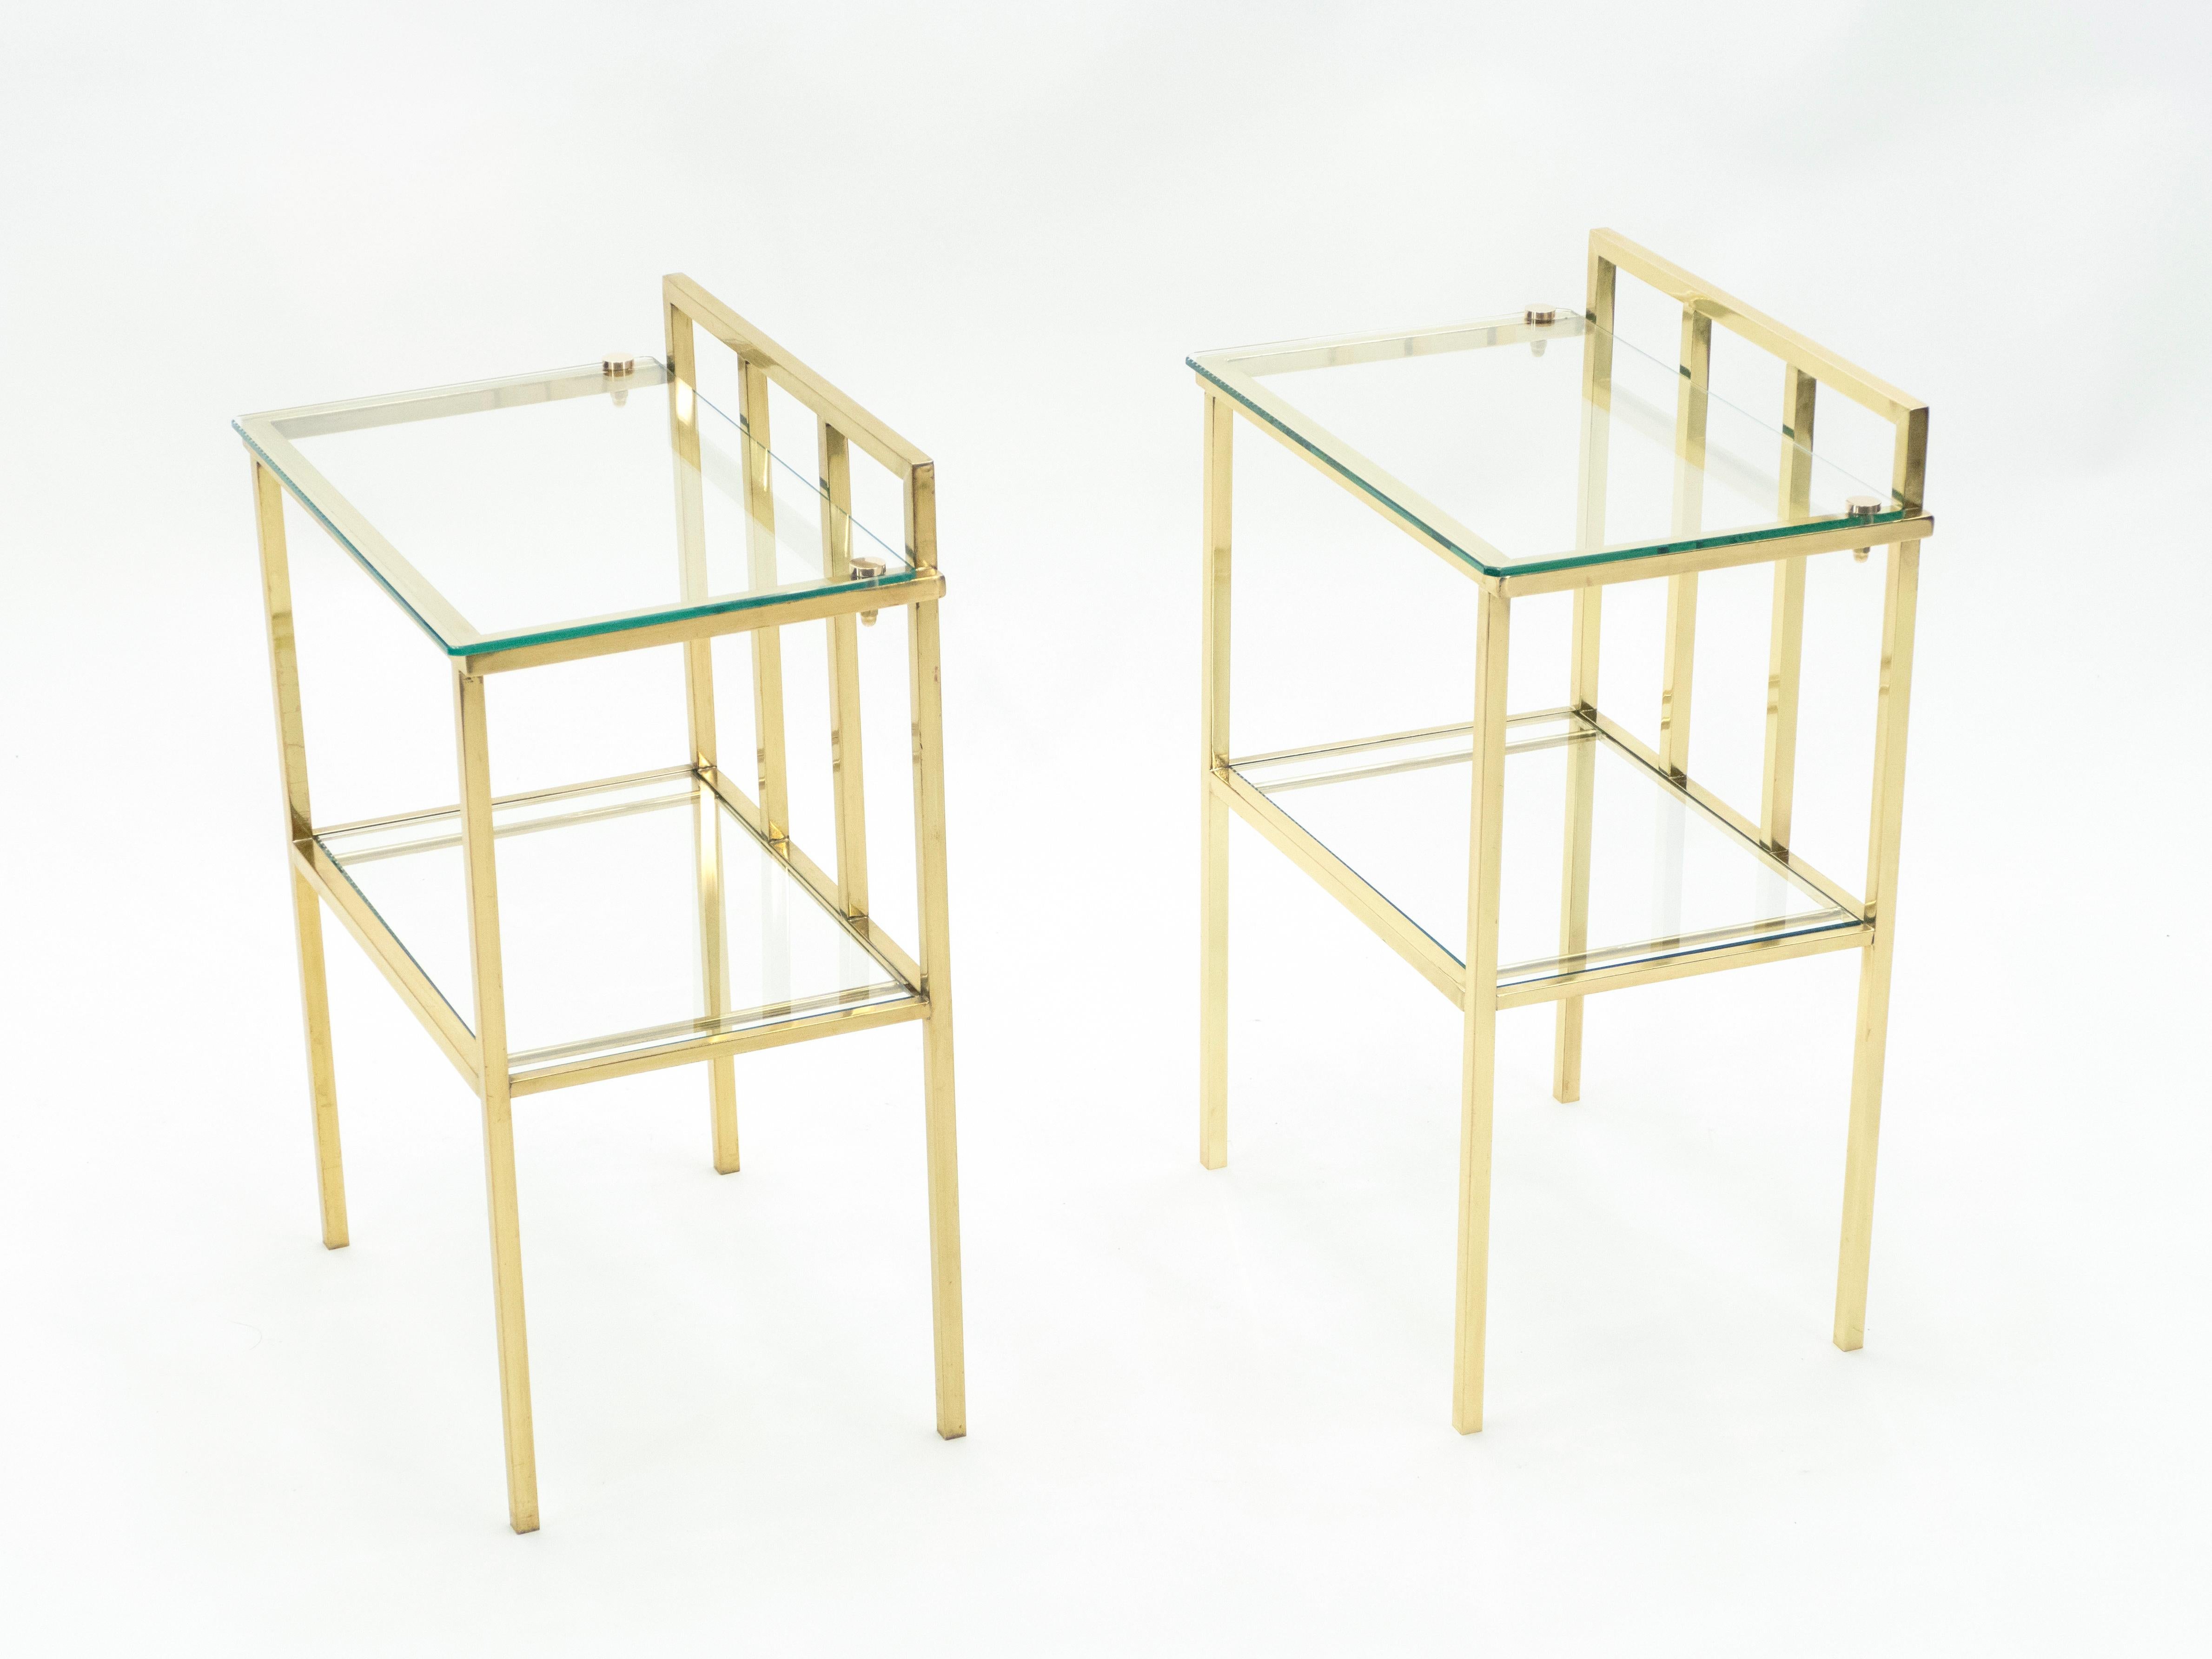 Simple lines point to these two-tier end tables French midcentury roots. Designed and produced in France in the early 1960s, probably by Marc du Plantier, it features silky brass legs and structure with glass tops. Its symmetry, elevated glass, and